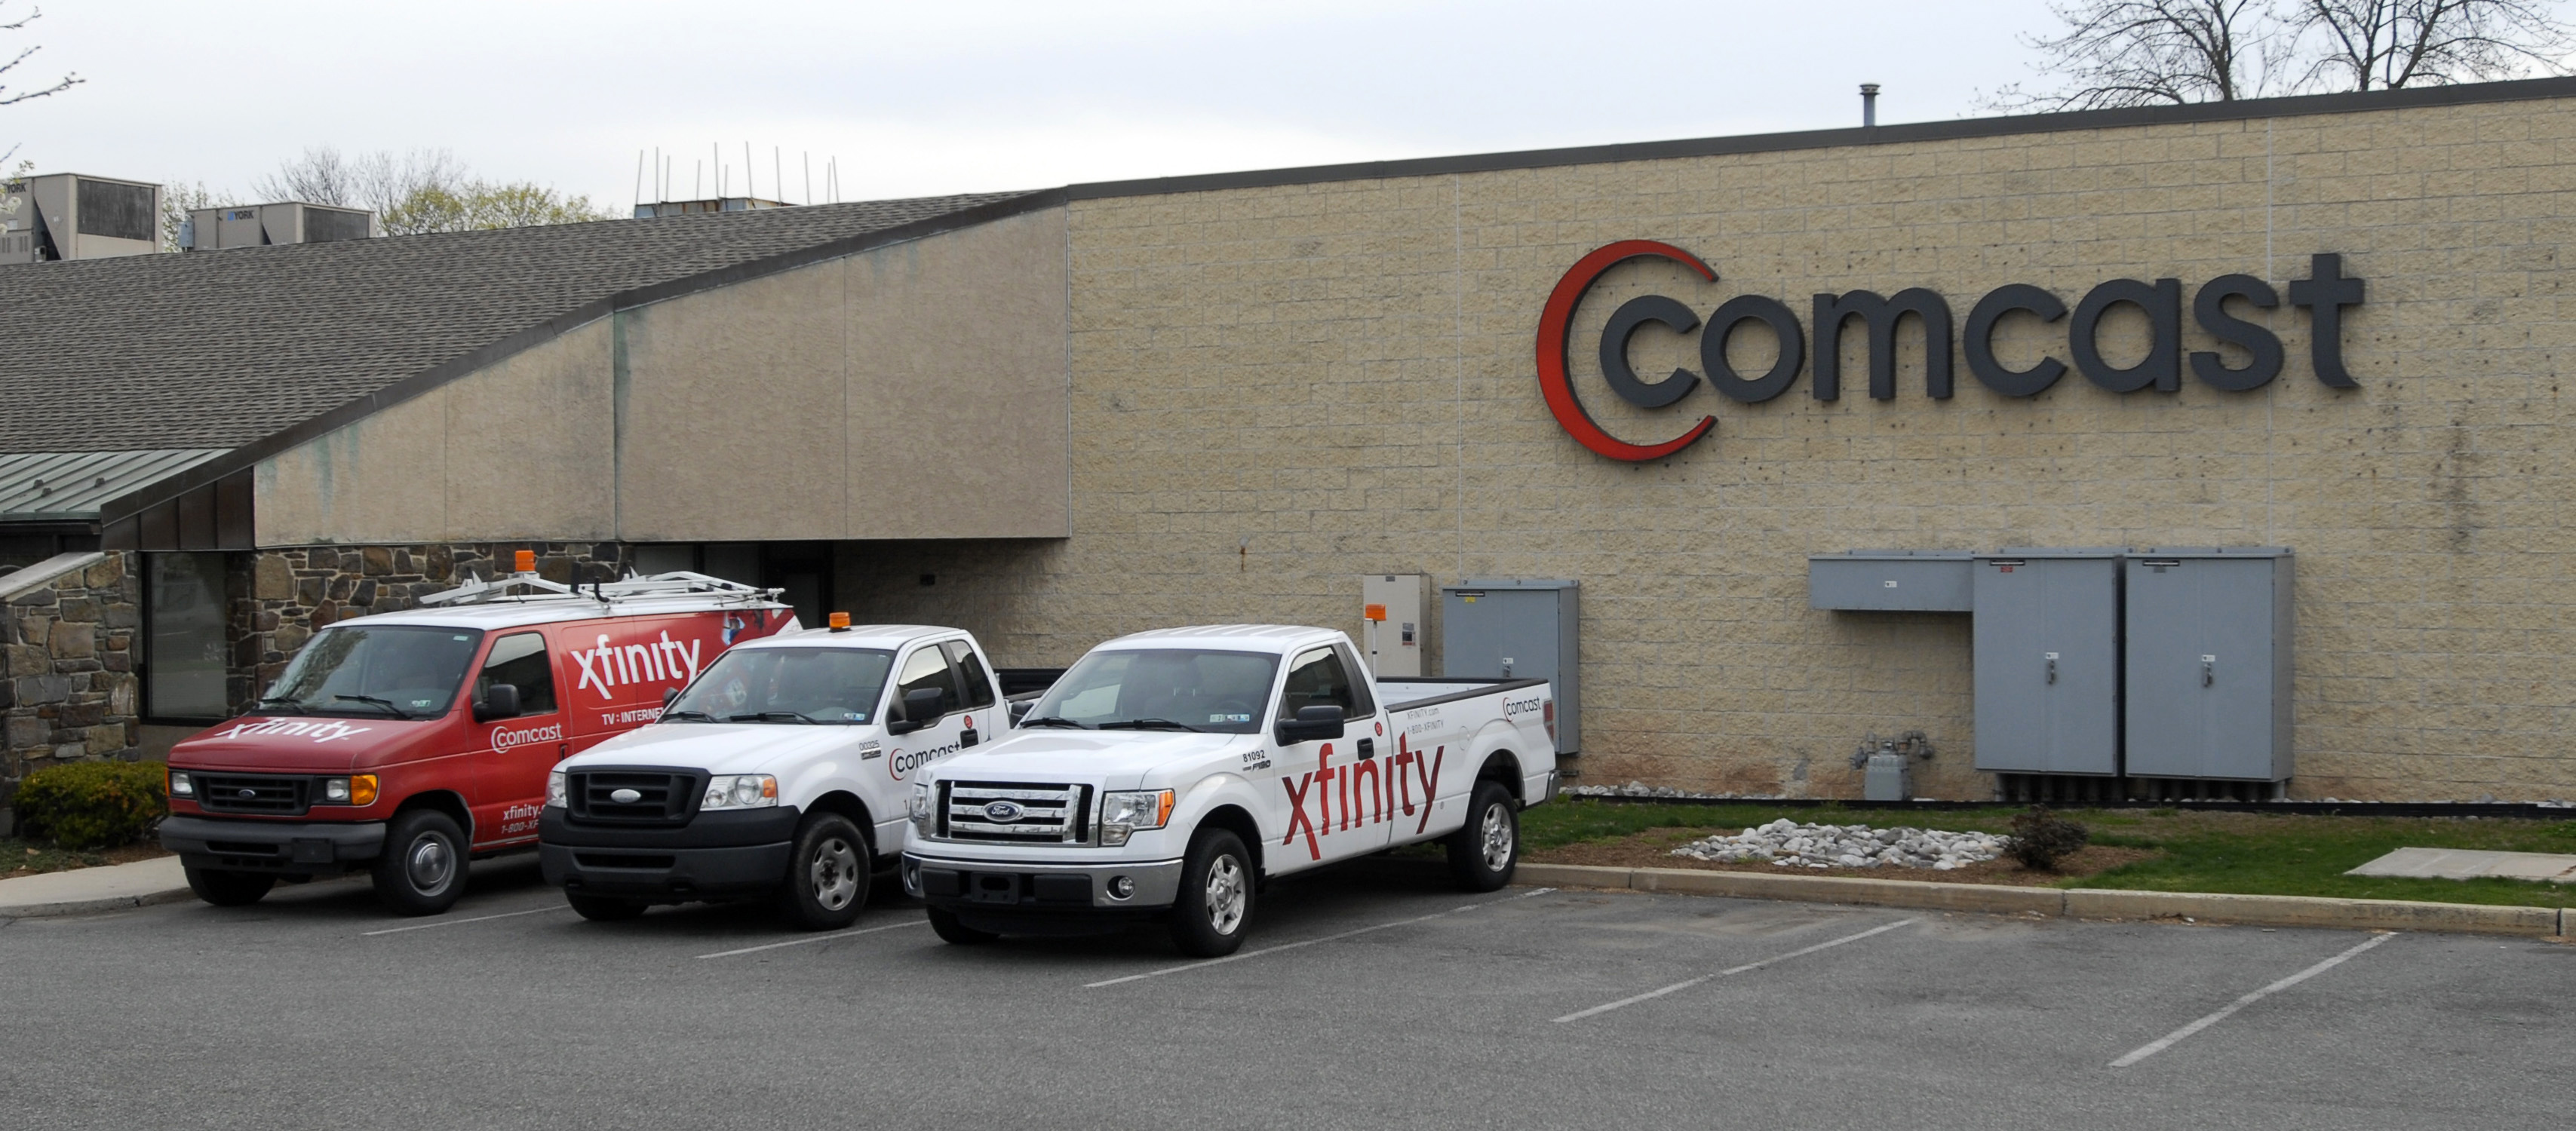 Vehicles with the Xfinity logo, a high-speed internet service offered by Comcast Corp., sit outside a Comcast facility in Pottstown, Pennsylvania, April 22, 2014. (Bradley C. Bower—Bloomberg/Getty Images)